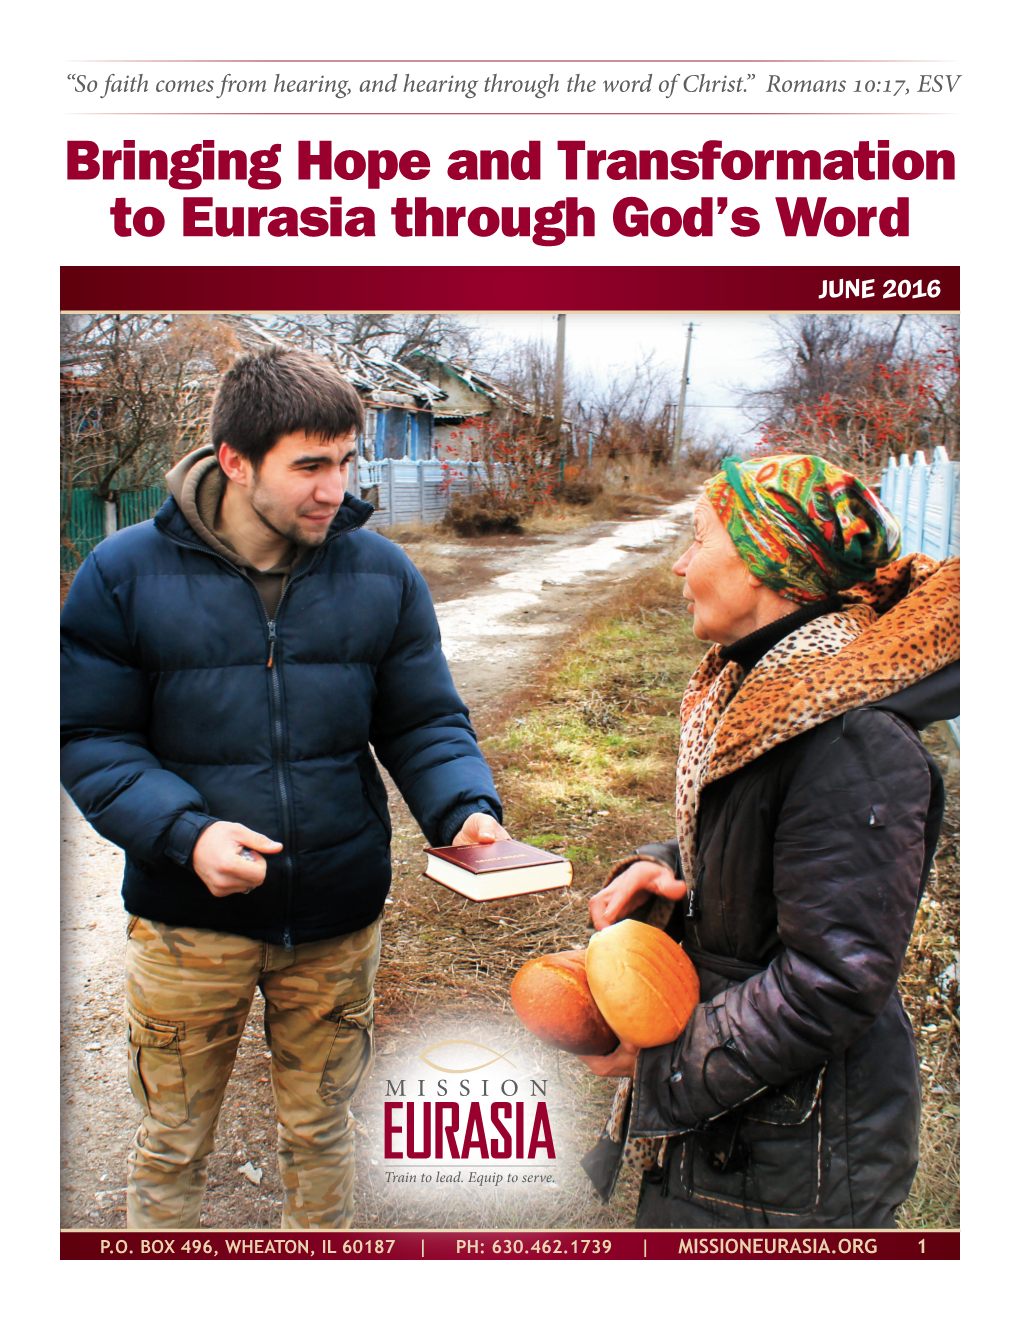 Bringing Hope and Transformation to Eurasia Through God's Word